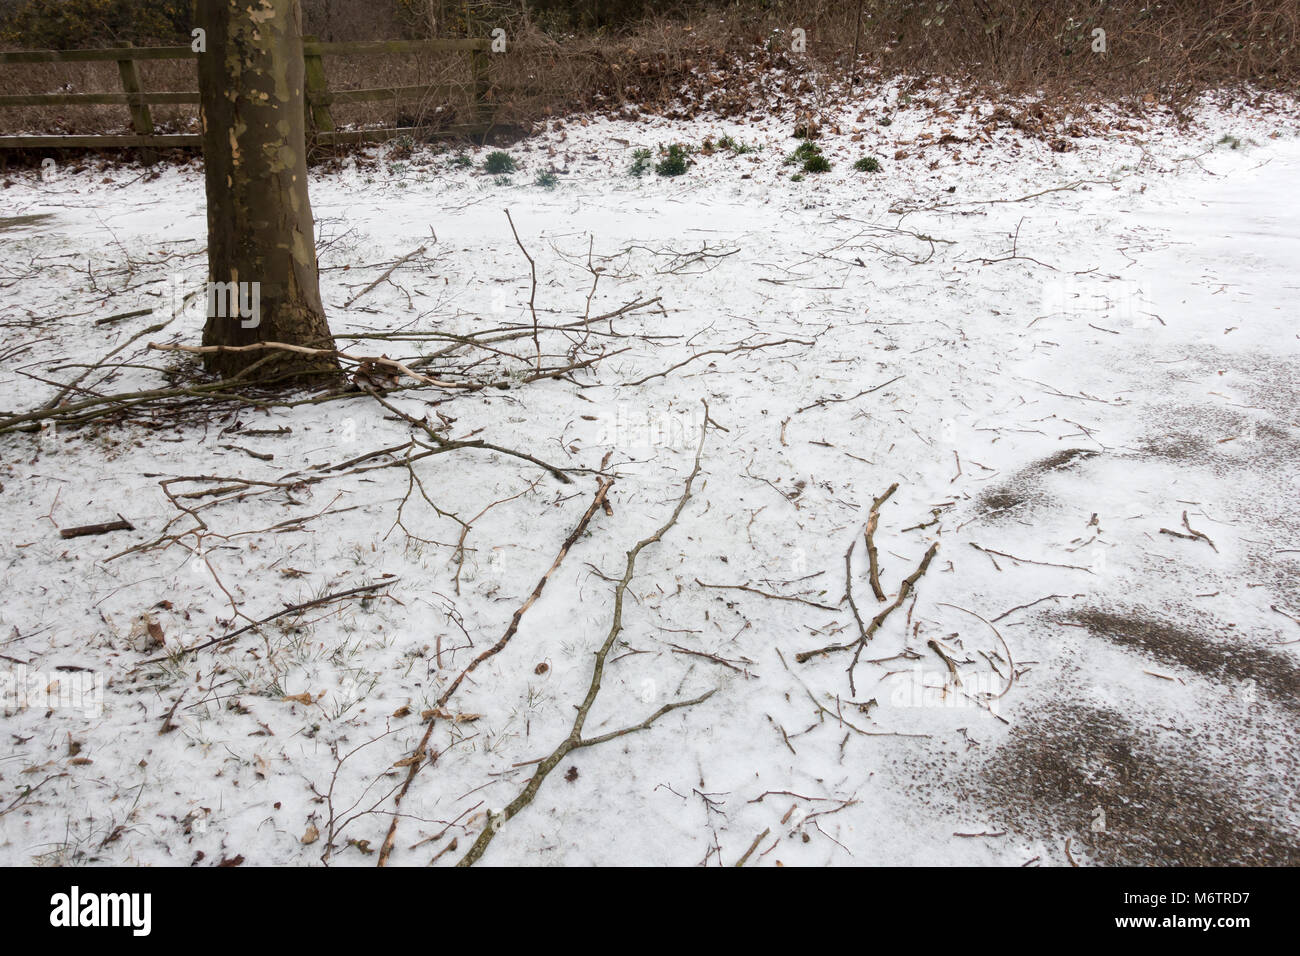 Snow covered ground with a tree trunk & twigs & branches, Dorset, United Kingdom Stock Photo